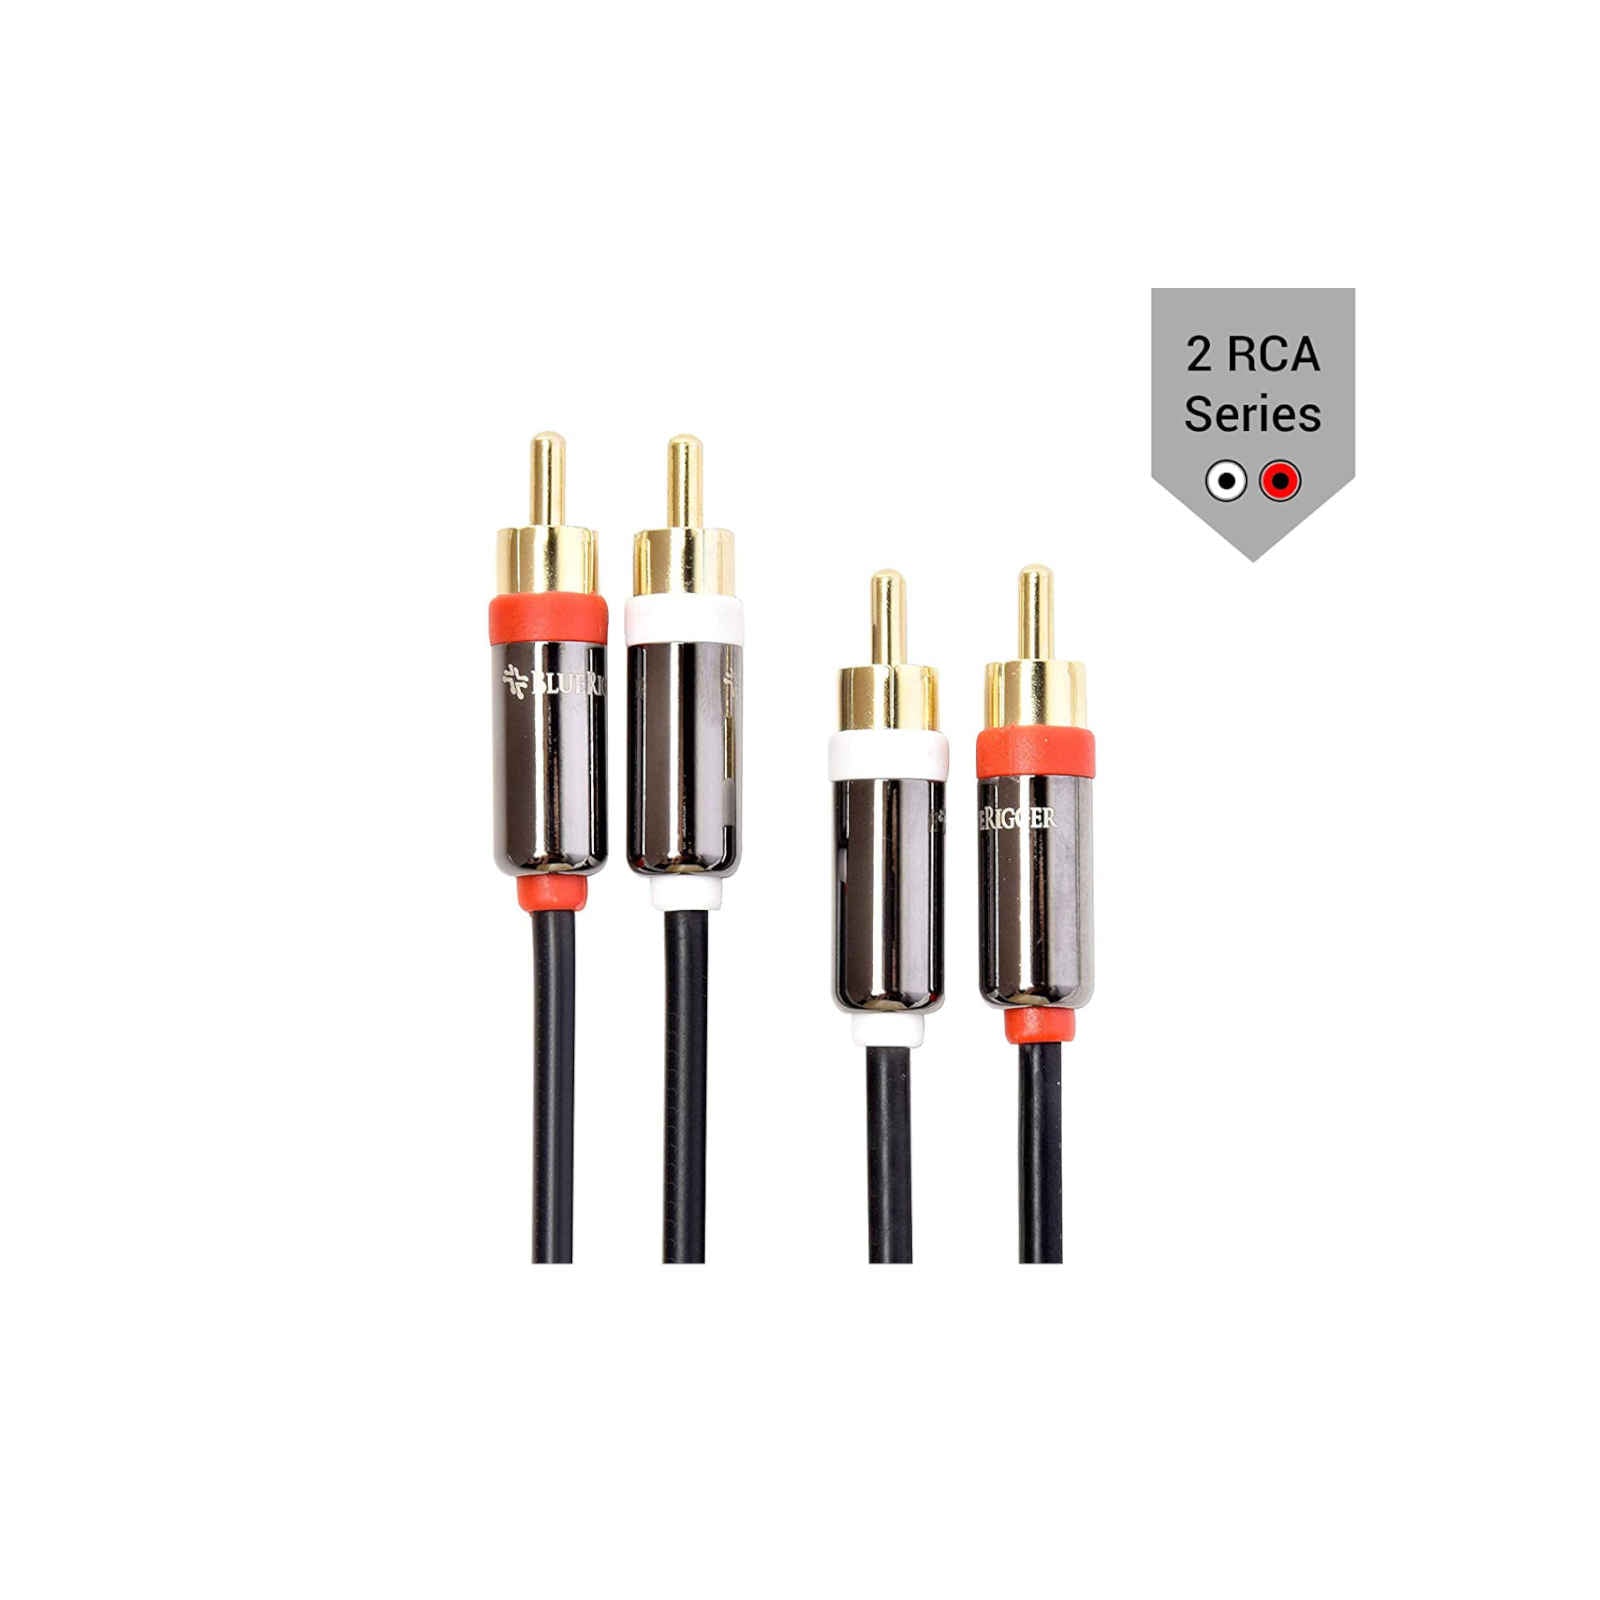 BlueRigger  RCA Stereo Cable - 2 x RCA Male to 2 x RCA Male Audio Cable (6ft /10ft /15ft) - Ooberpad